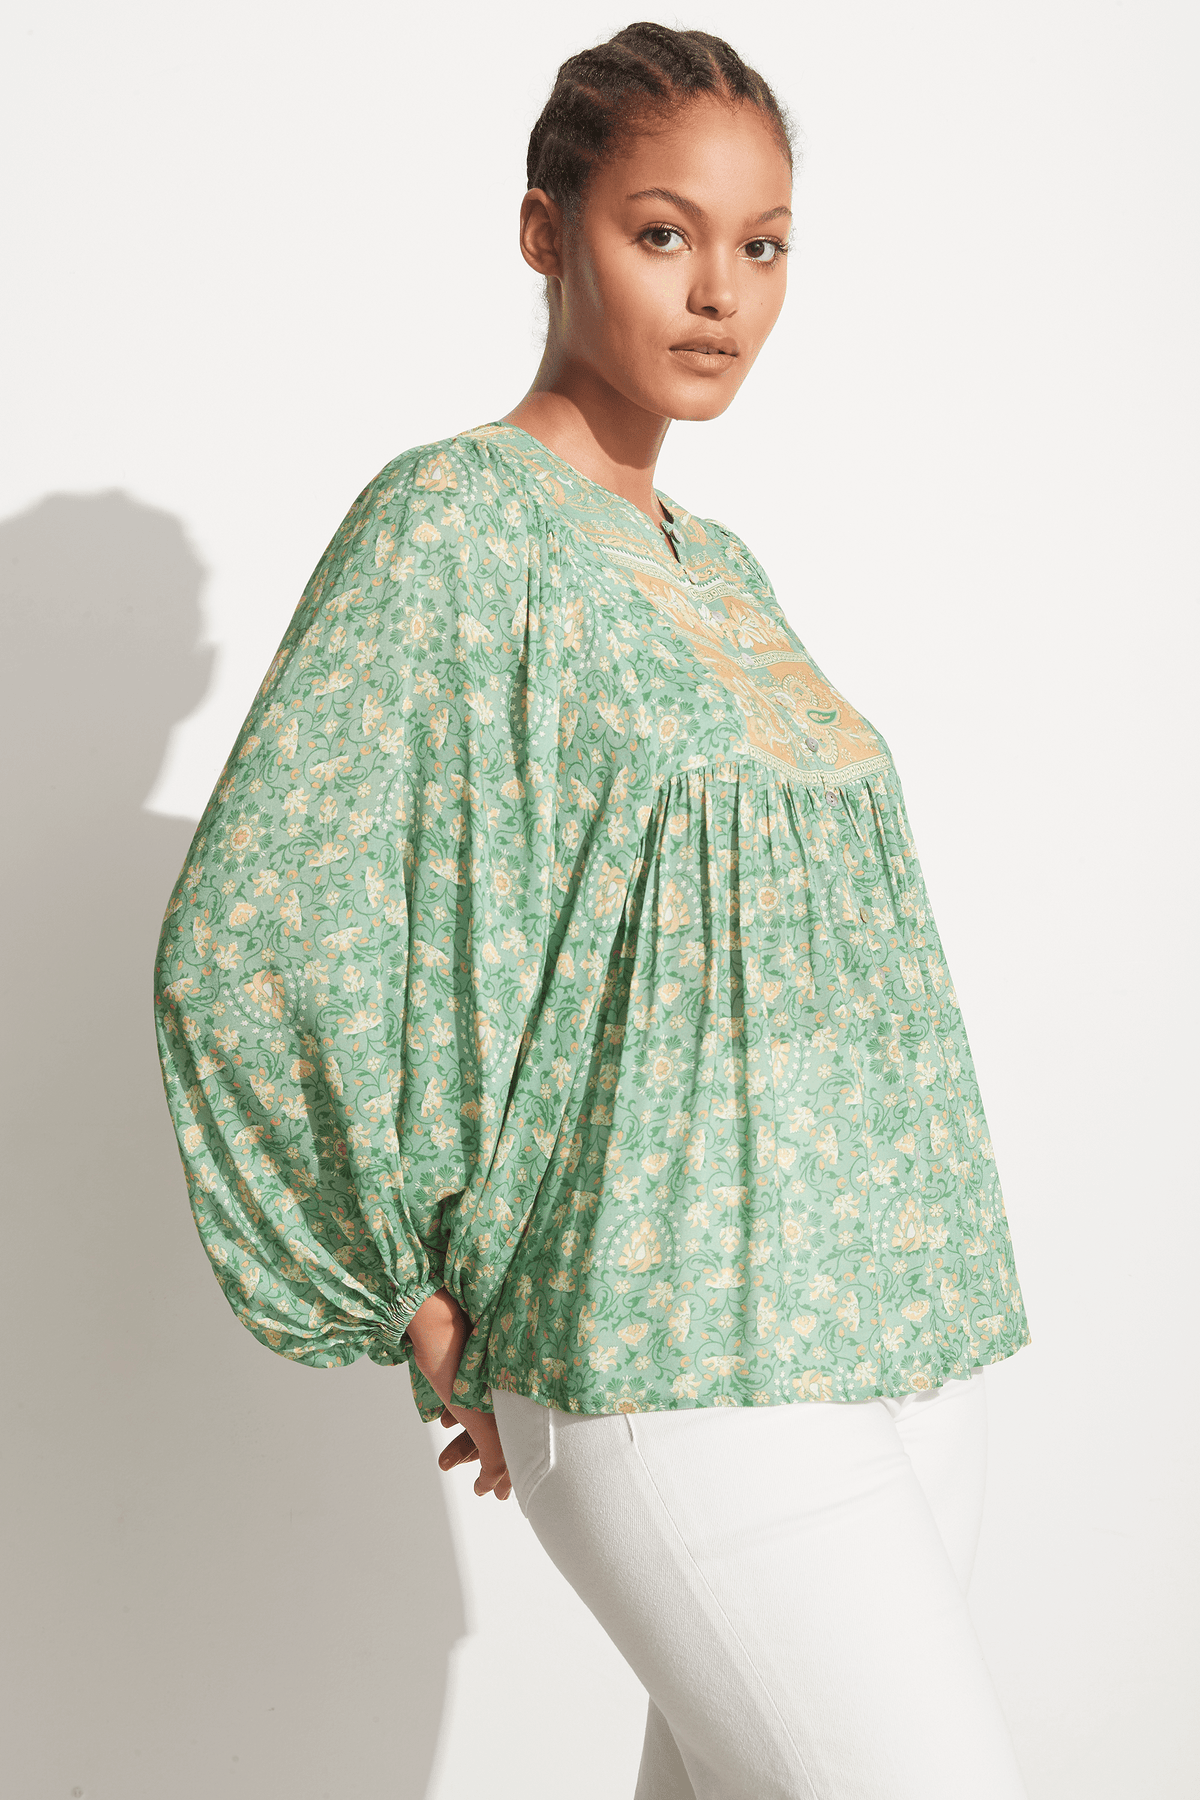 SPELL Madame peacock boho blouse in emerald